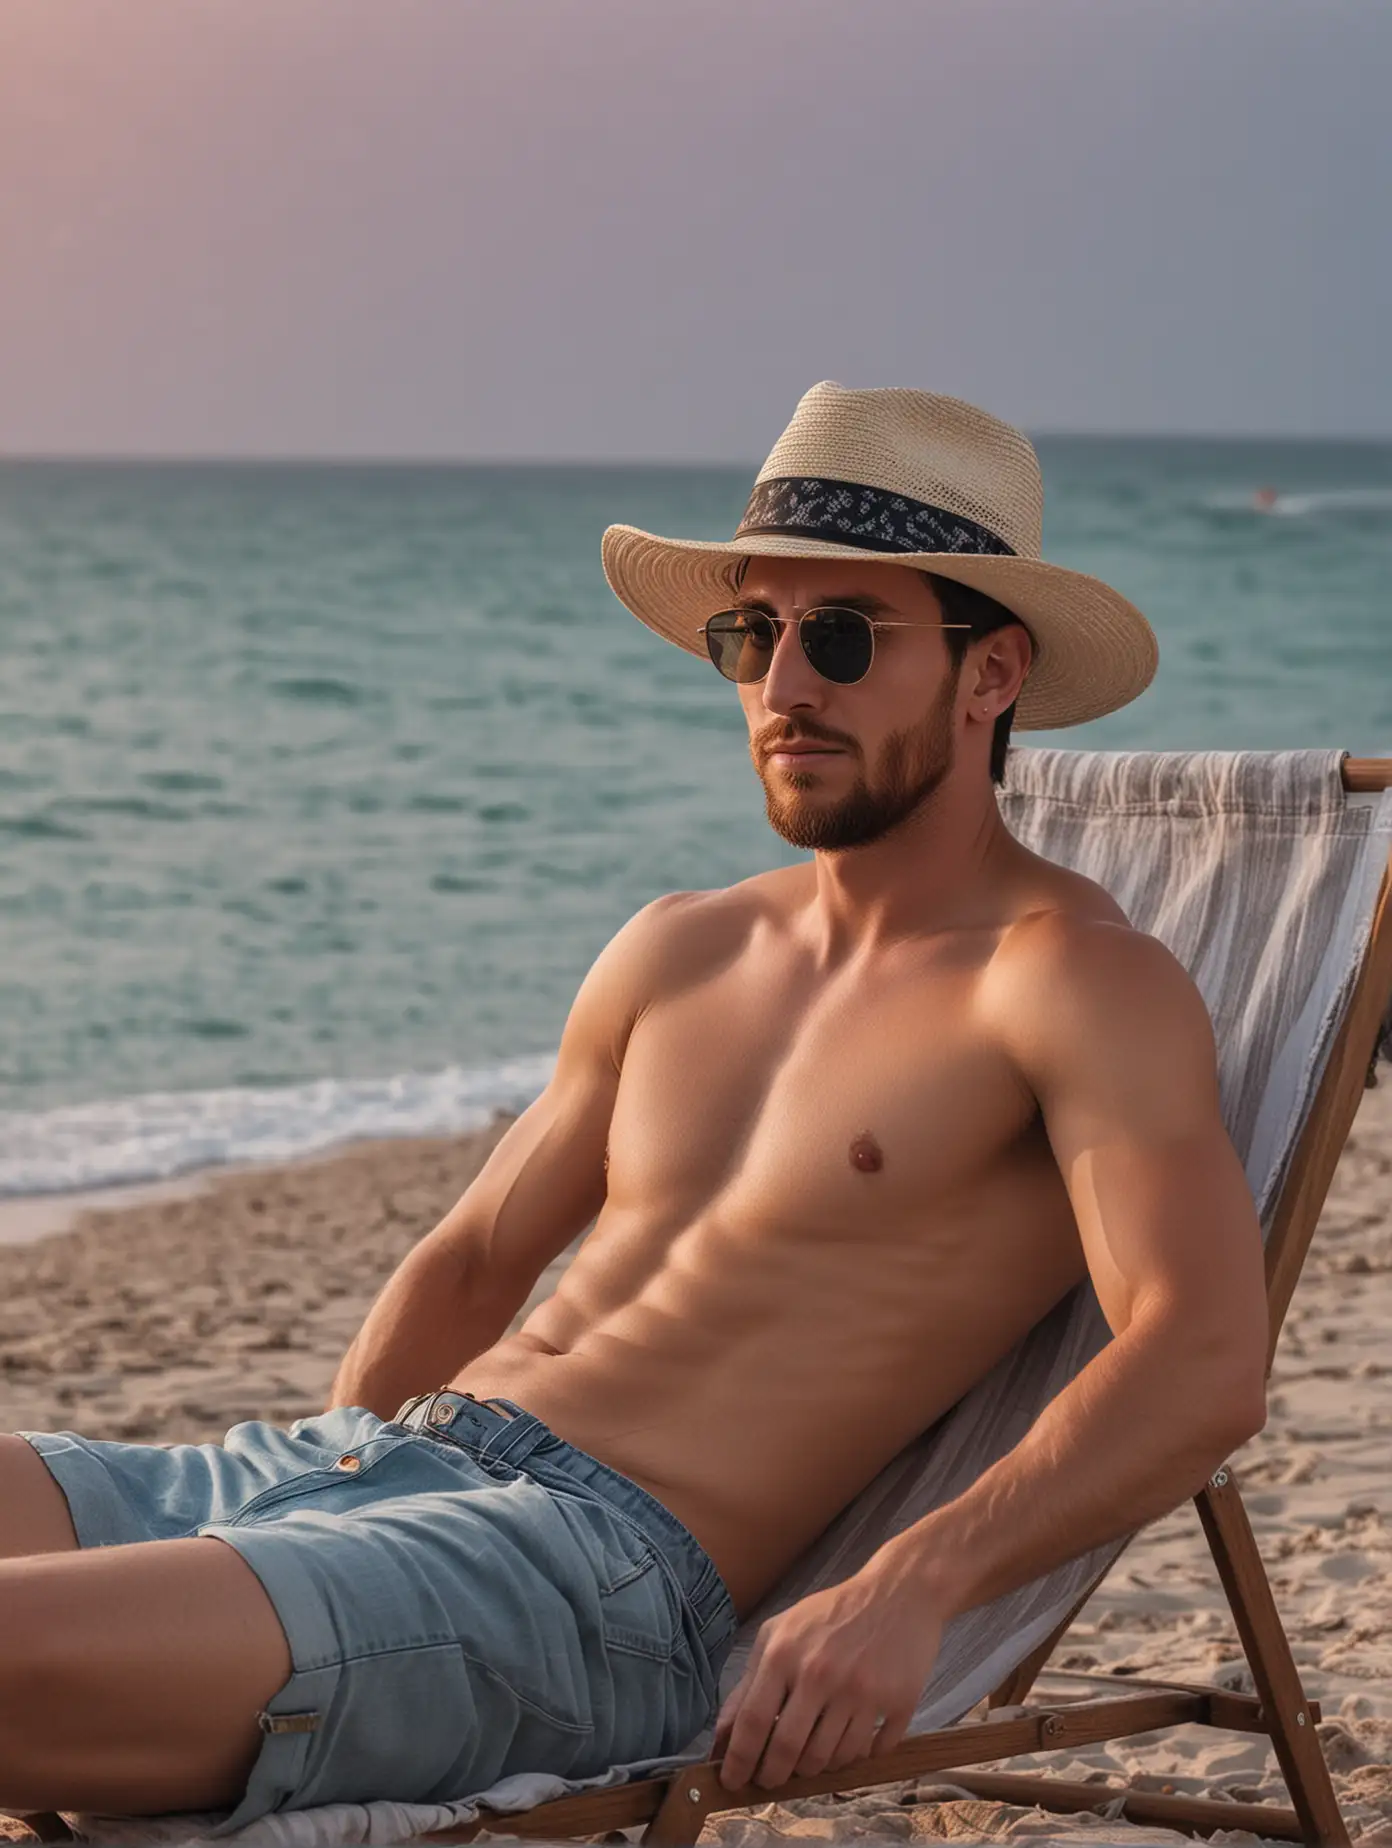 leonel messi relaxing on the beach twilight hat glasses. Long shot